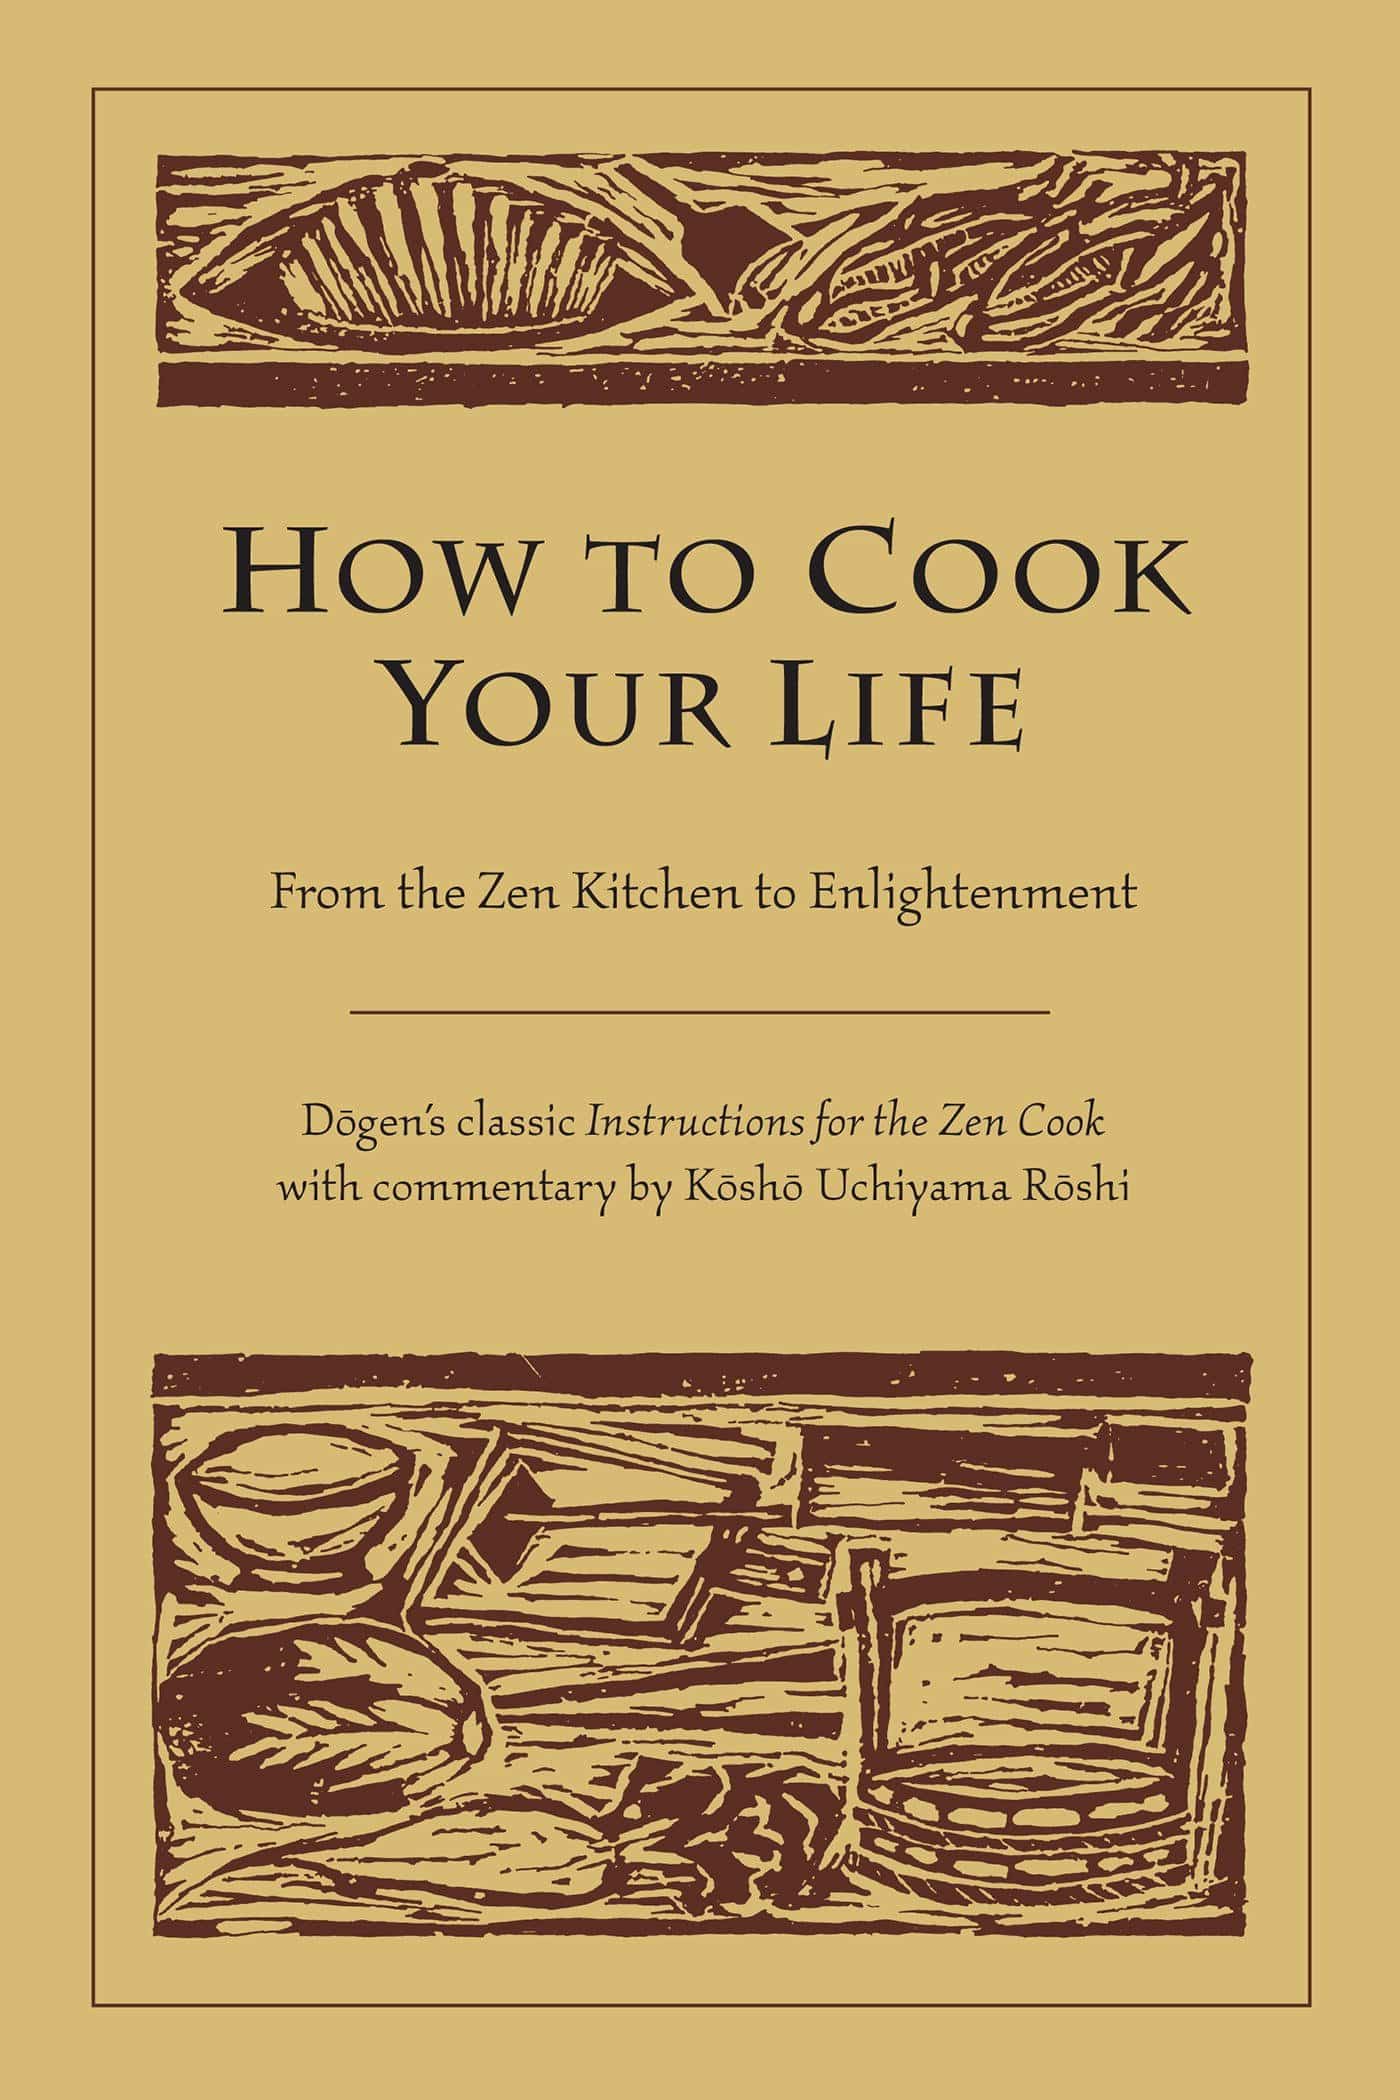 The cover of How To Cook Your Life